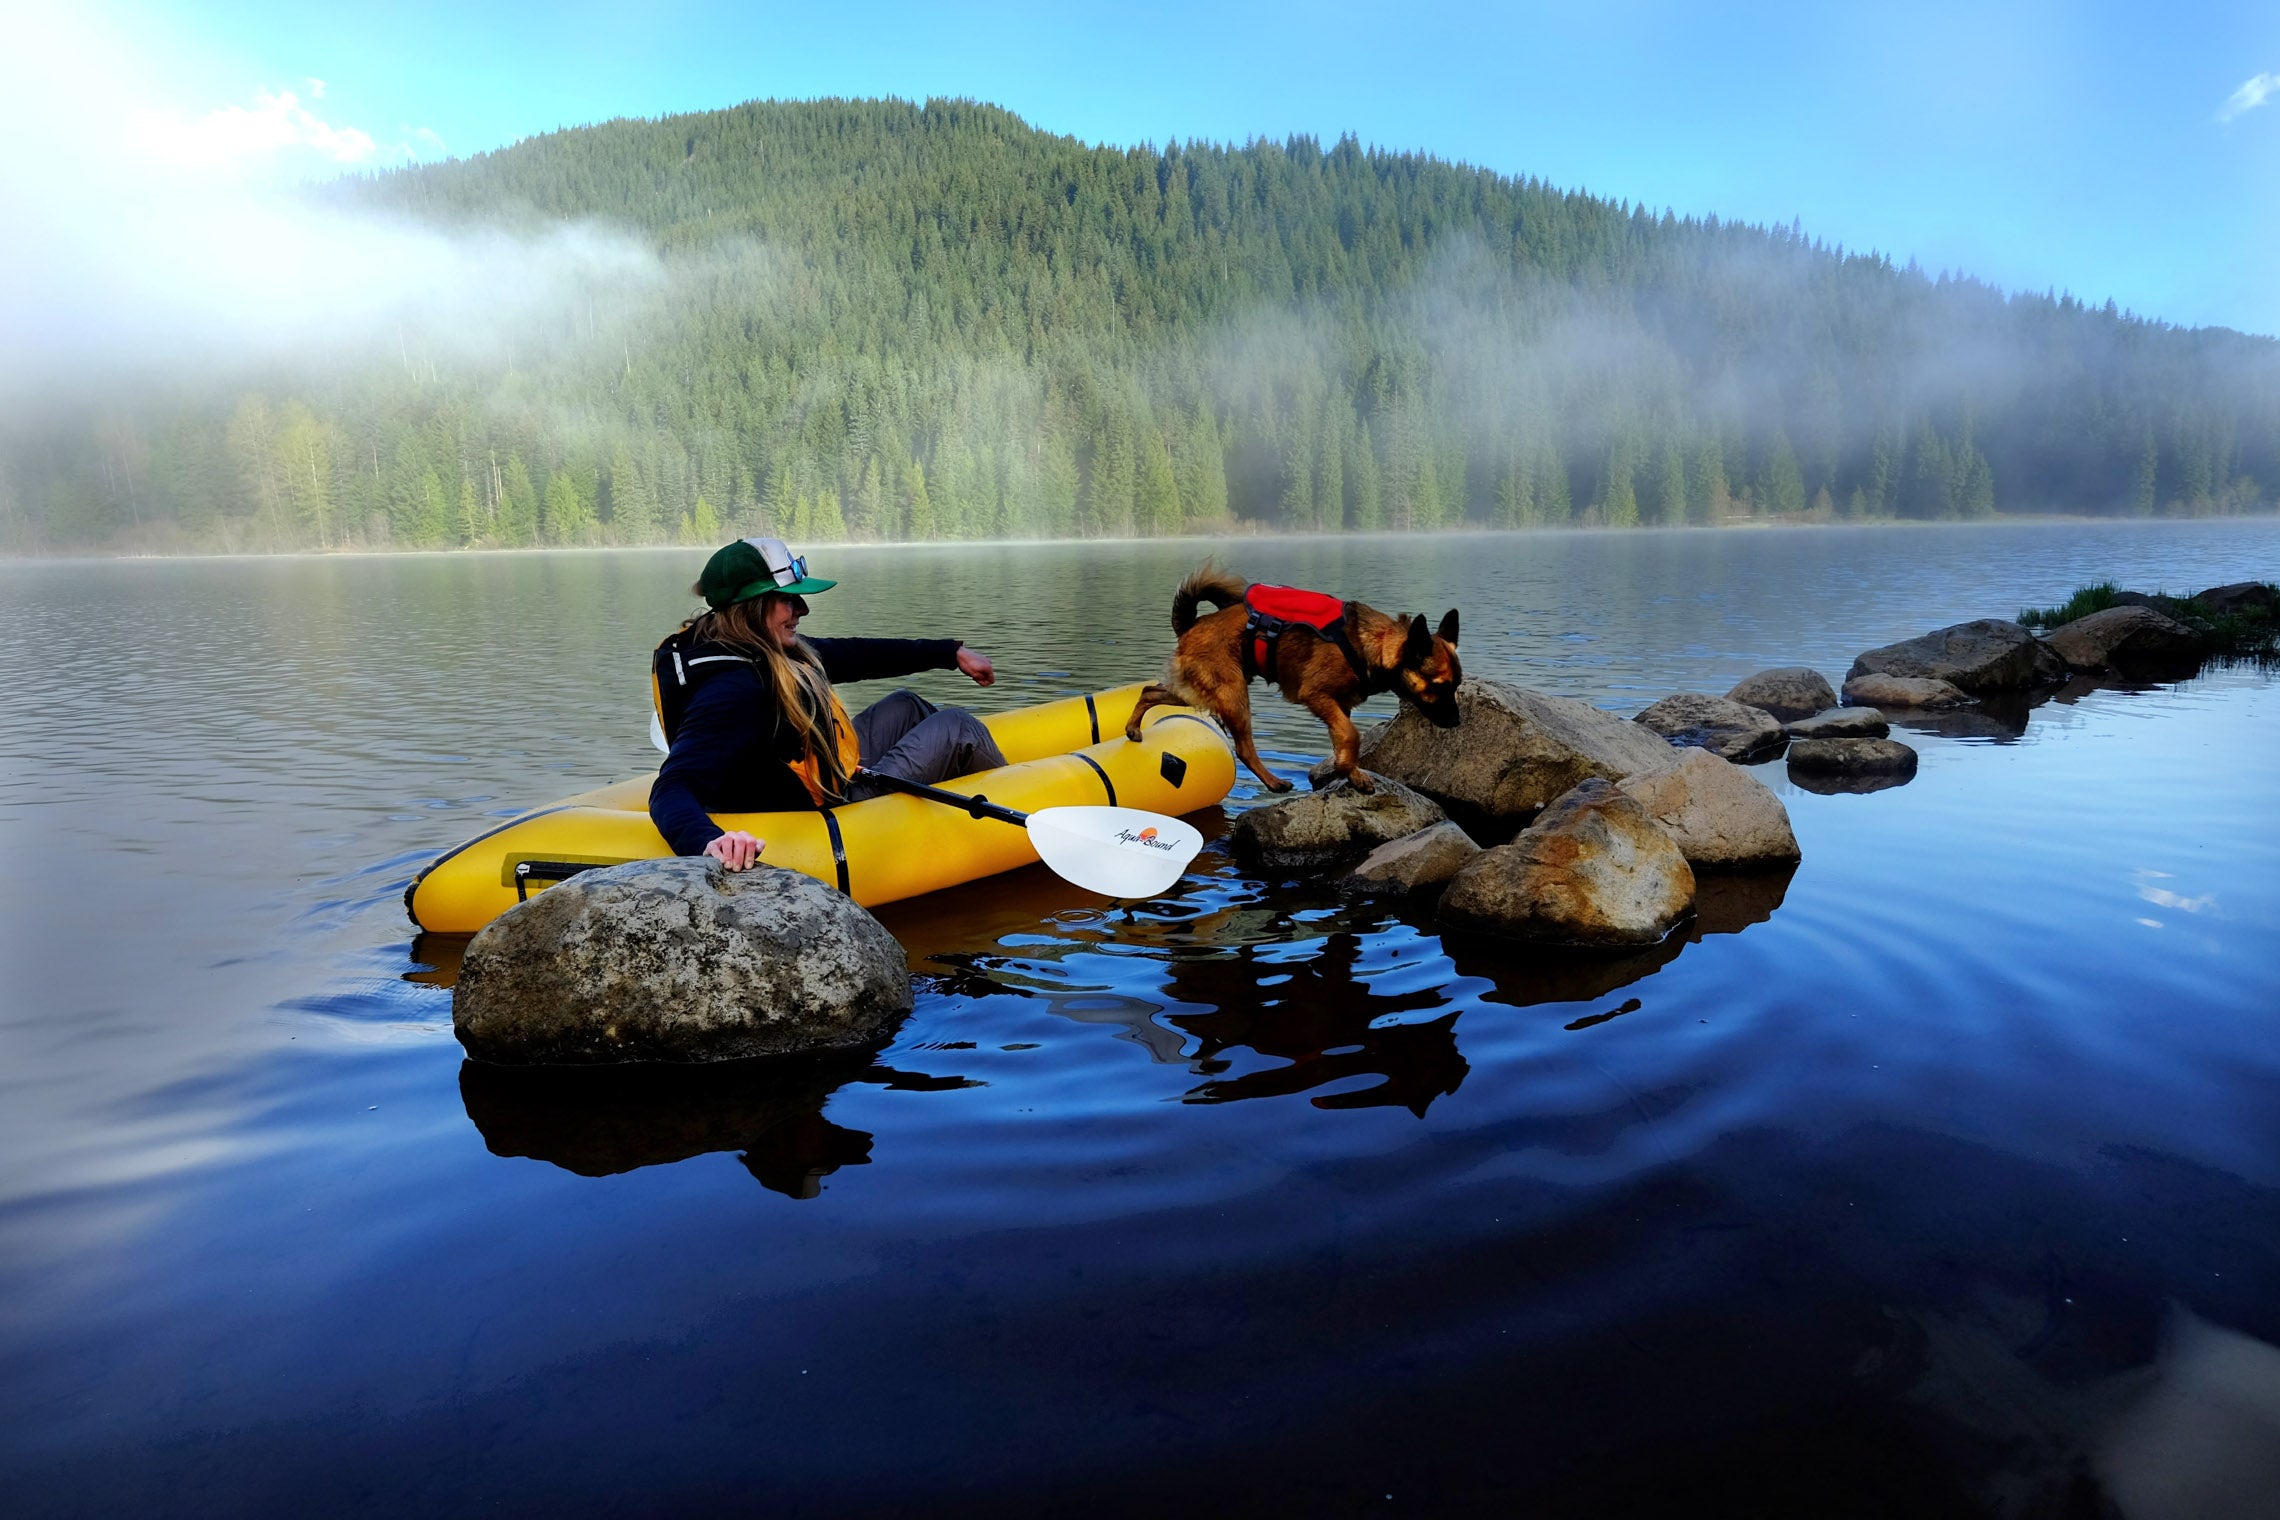 Tips for Packrafting with Your Dog Kokopelli